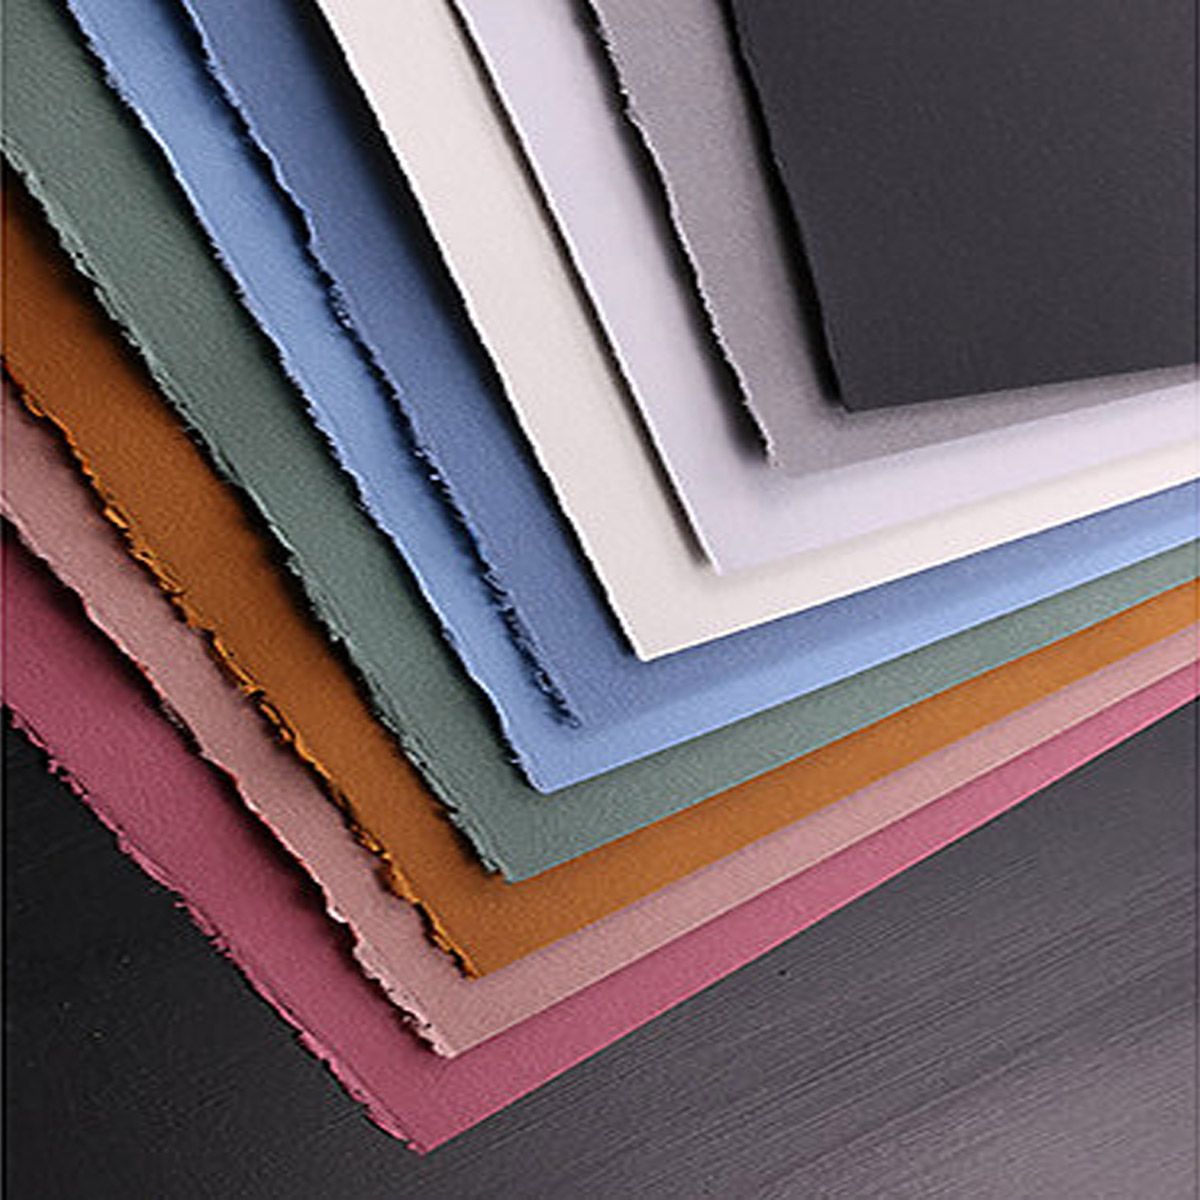 Fabriano Cromia Paper Sheets